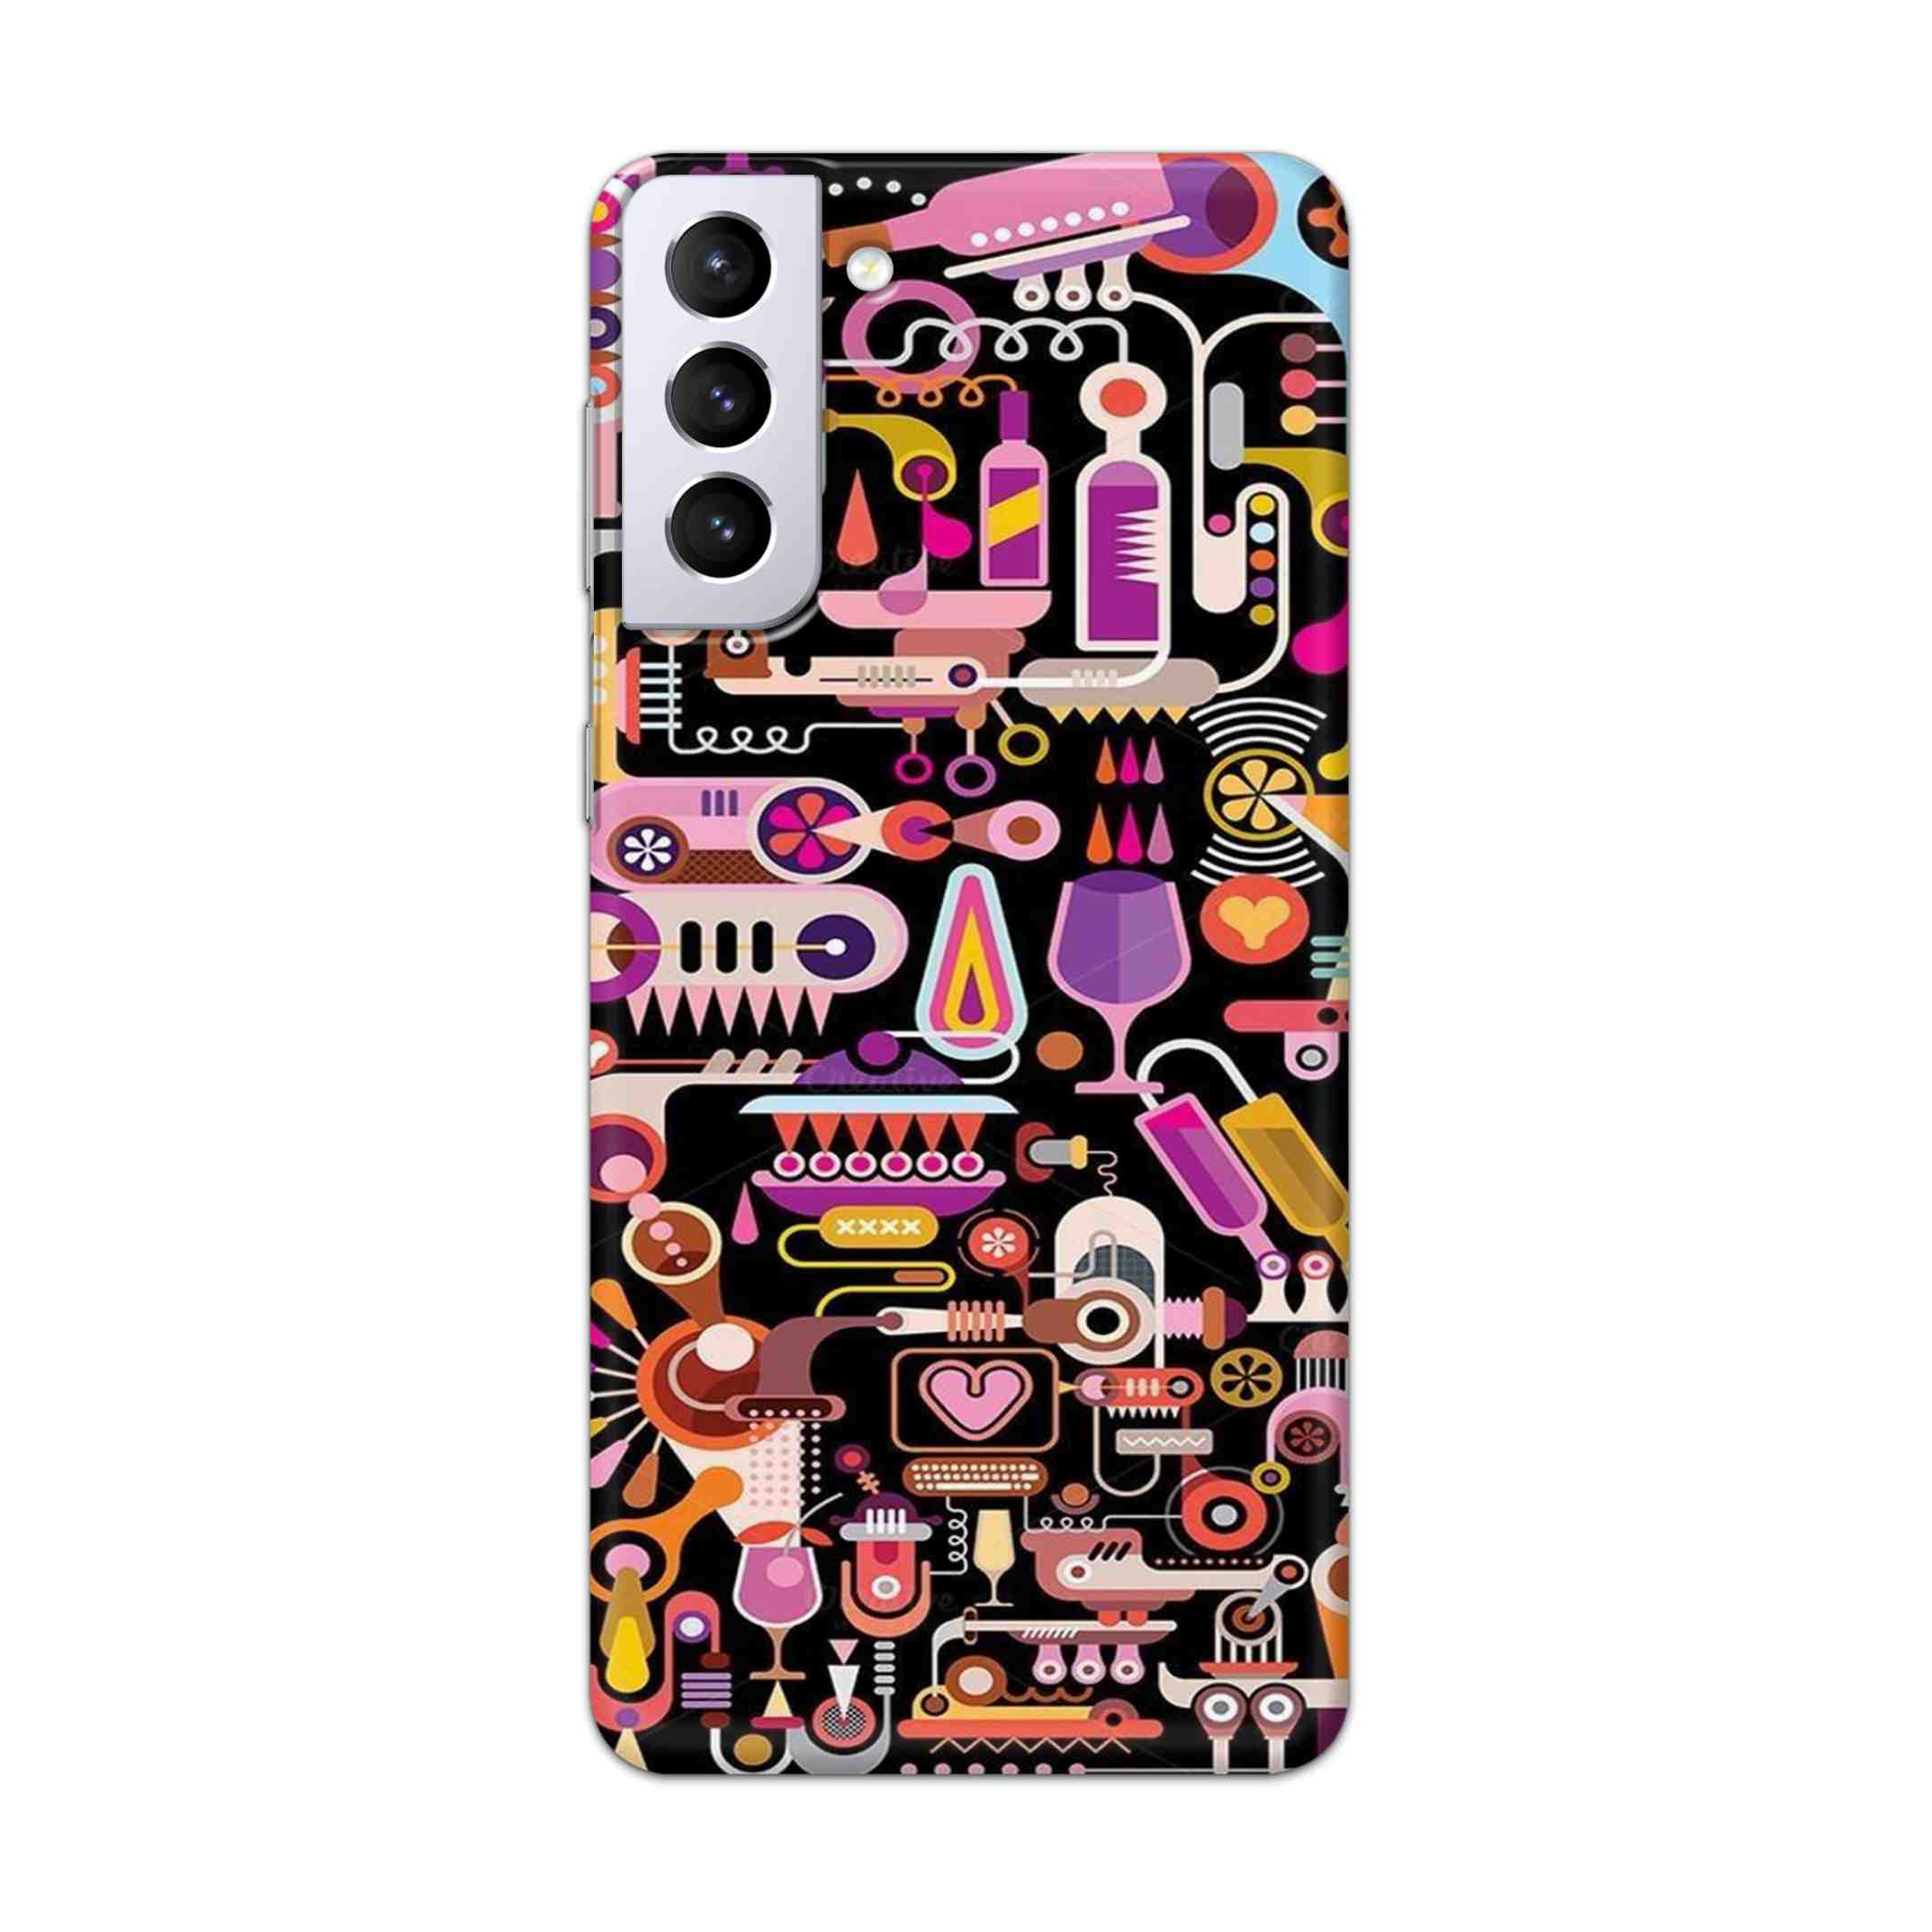 Buy Lab Art Hard Back Mobile Phone Case Cover For Samsung Galaxy S21 Plus Online